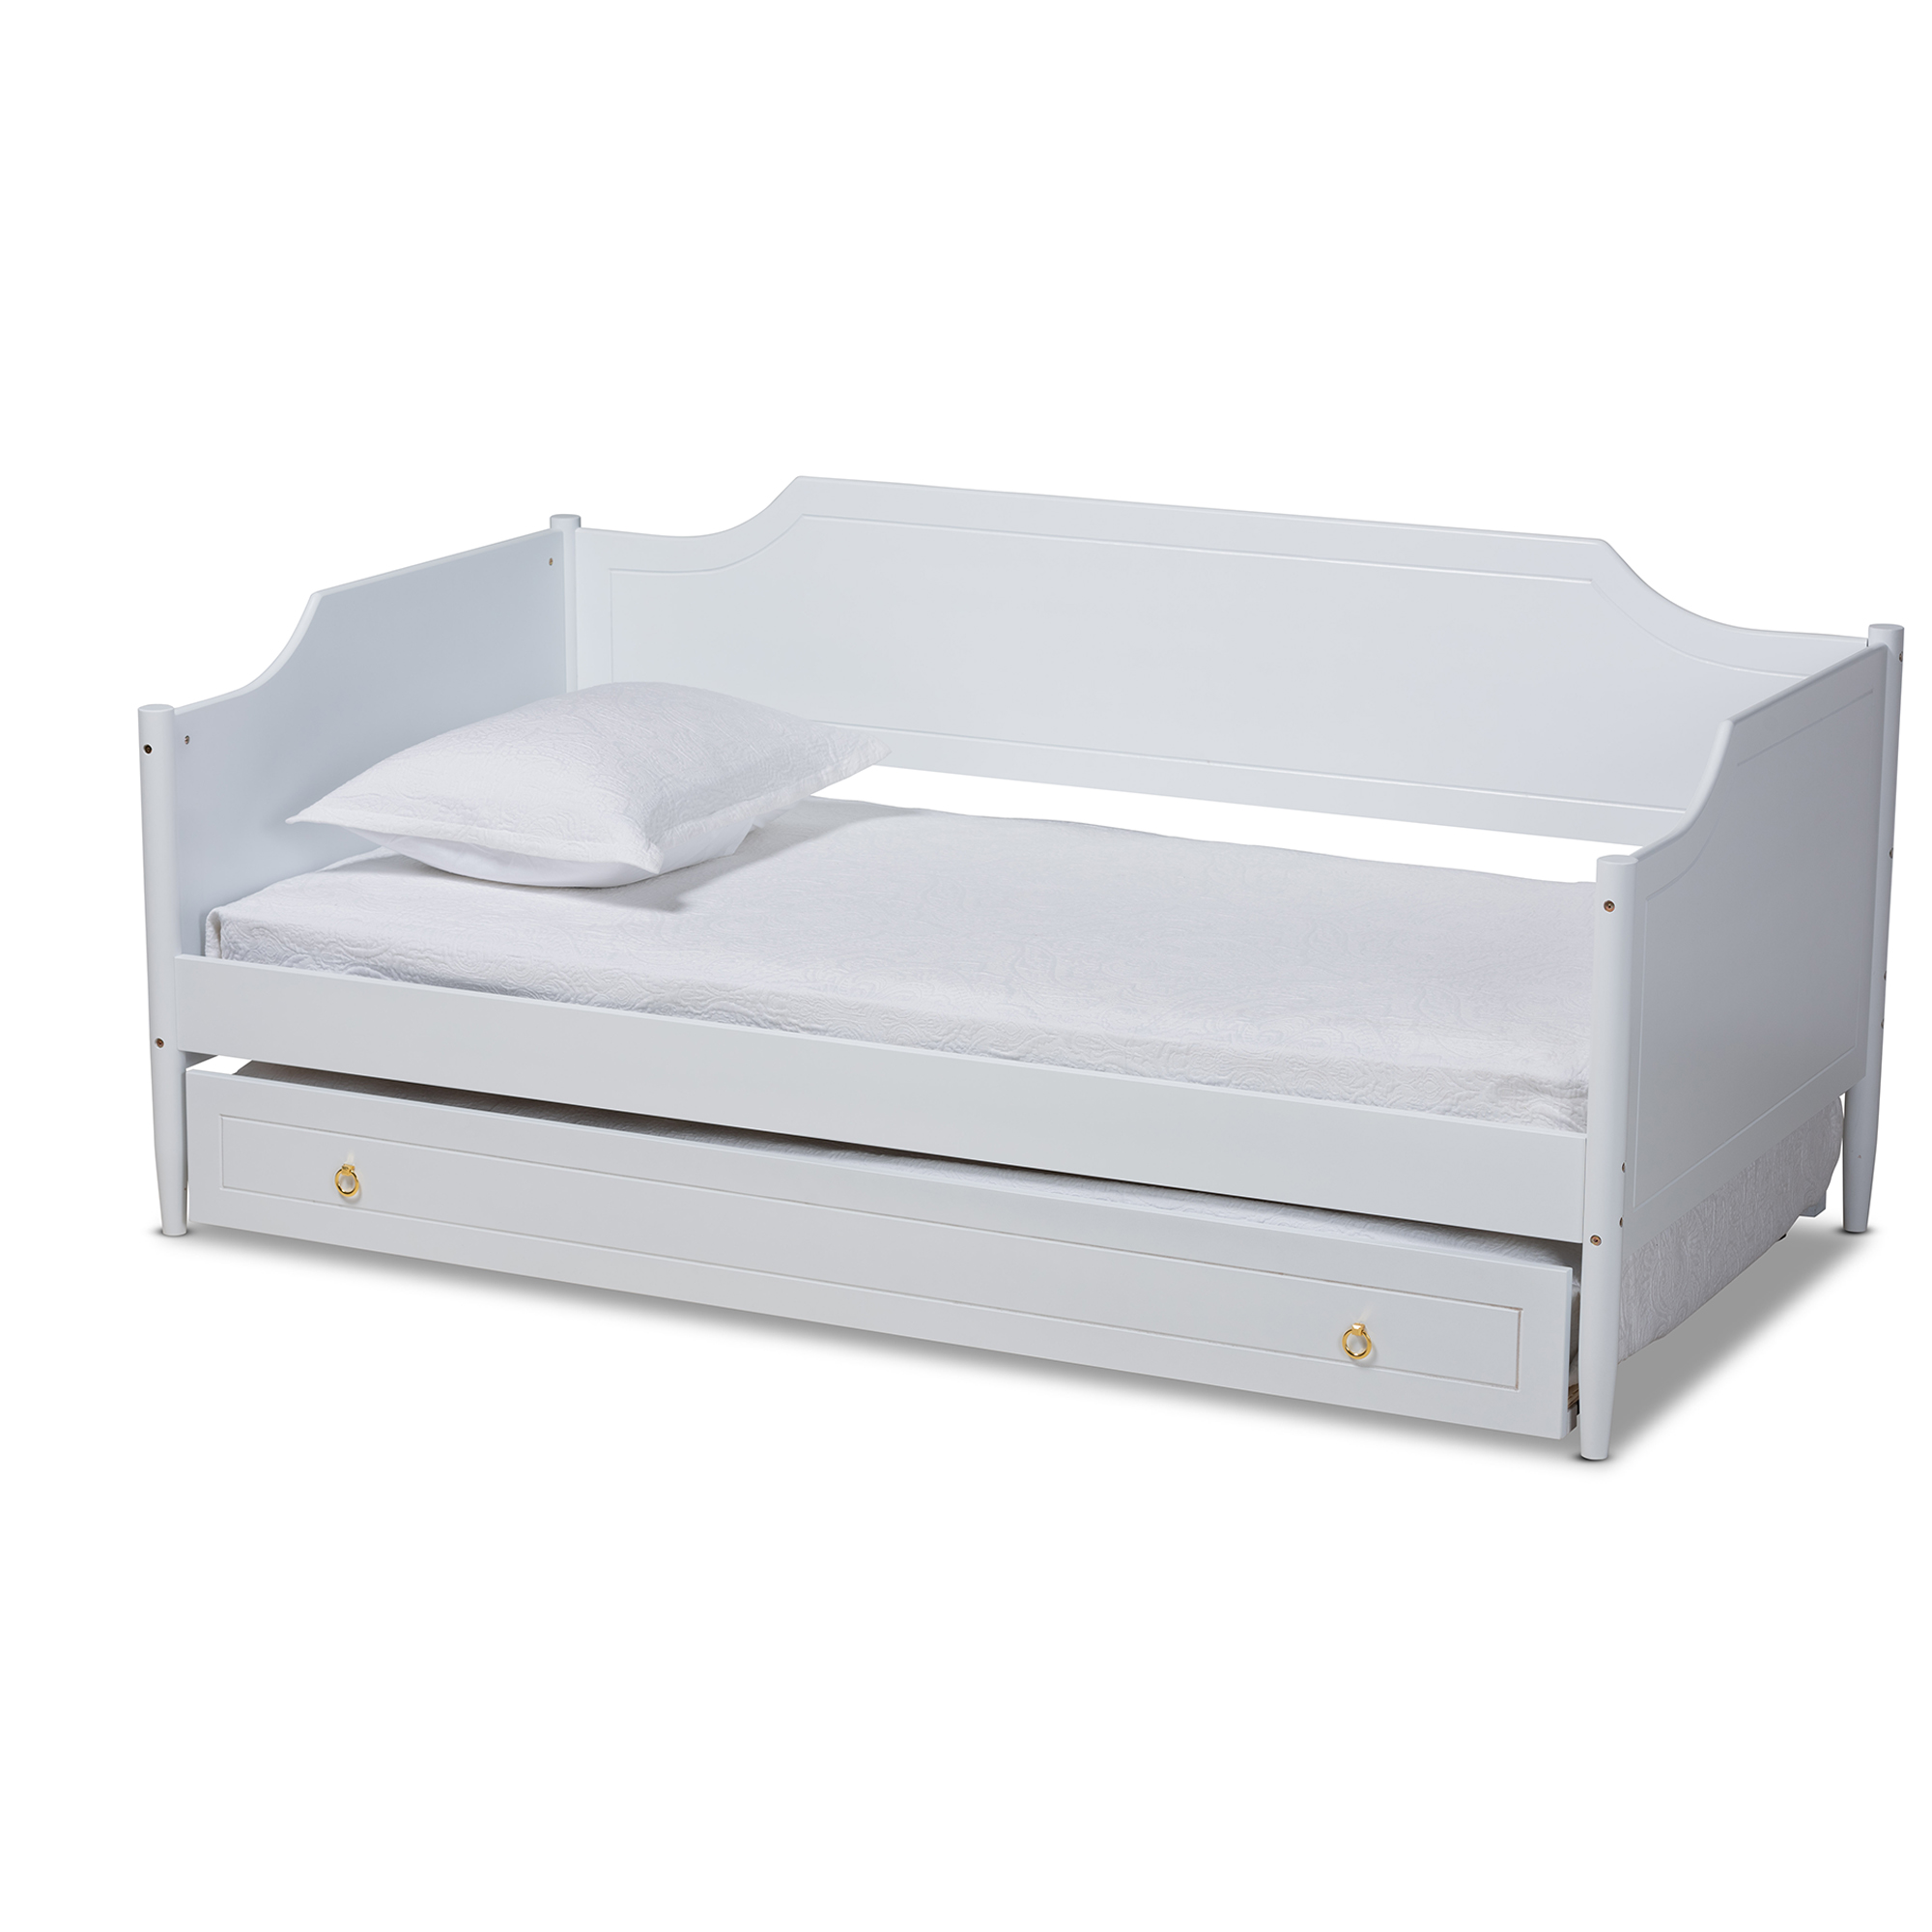 Baxton Studio Alya Rubberwood Daybed With Trundle - White/Gold